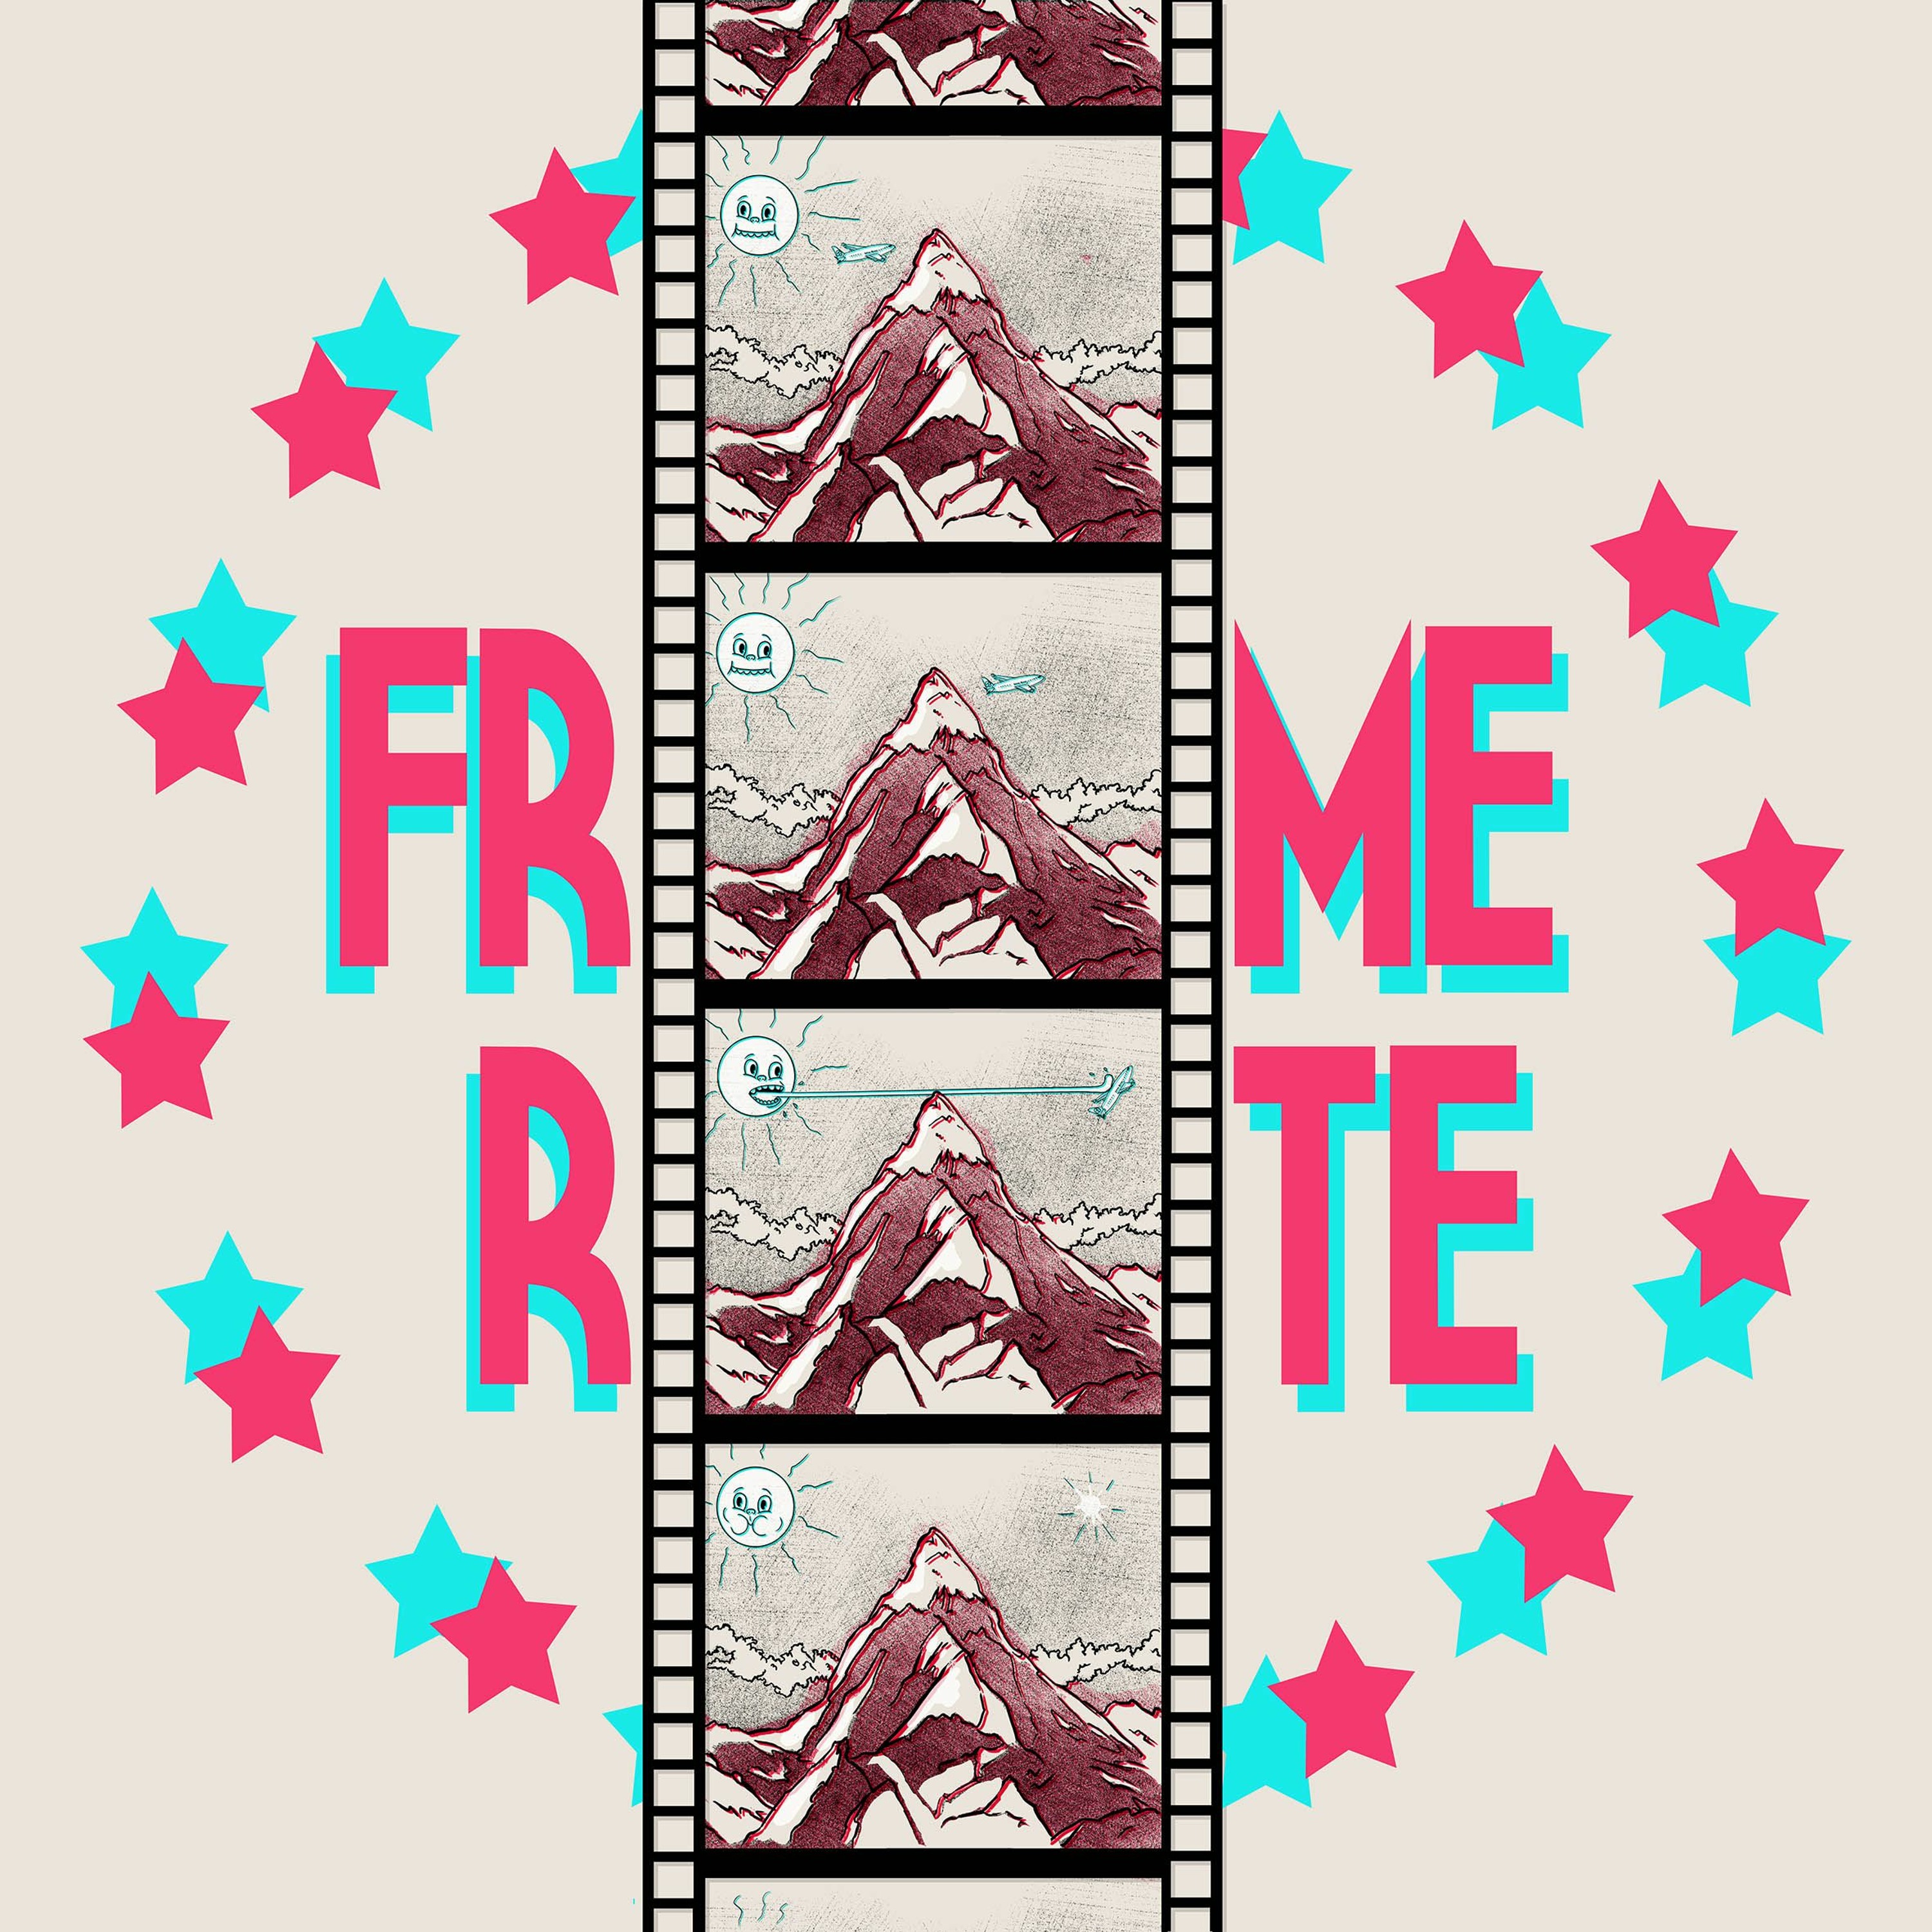 691. Frame Rate: Noises Off… (Feat. Sarah Griffith)